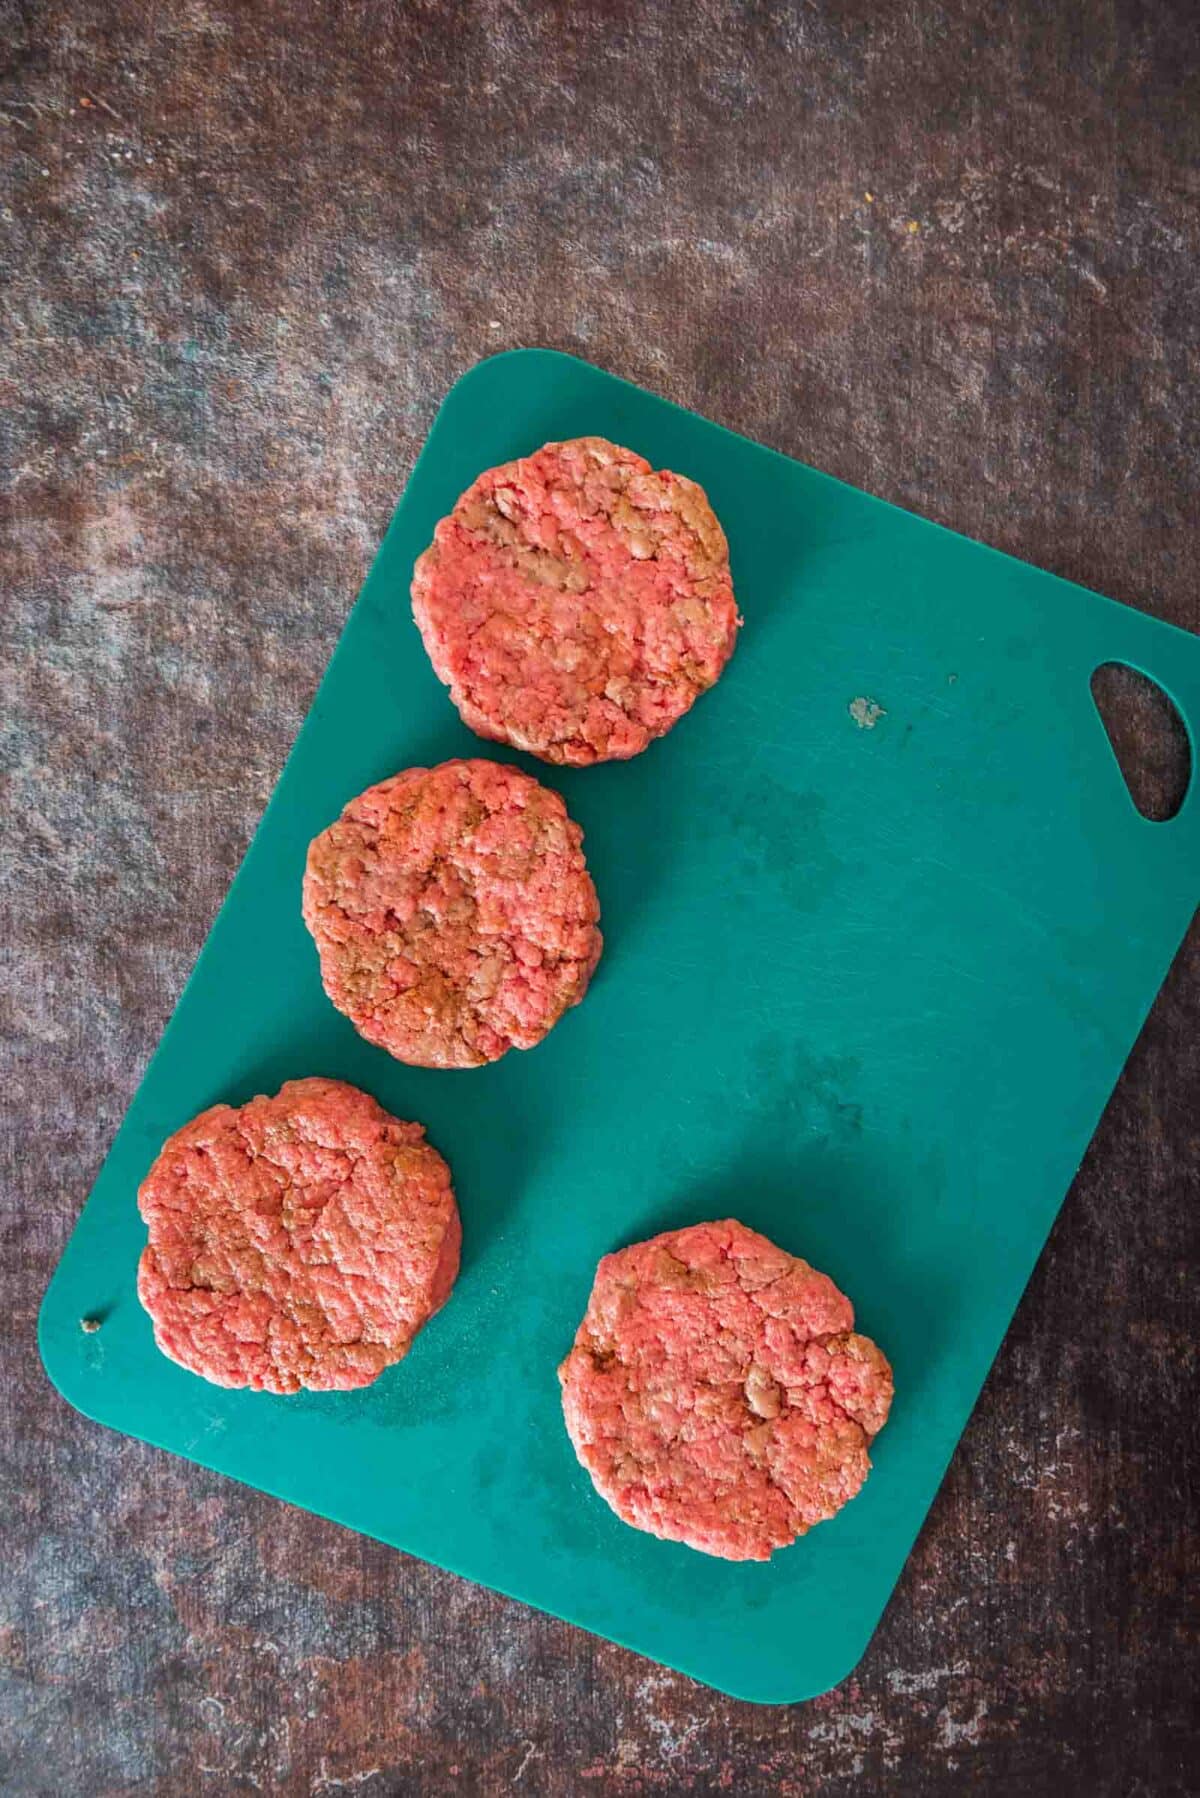 Ground beef formed into patties. 